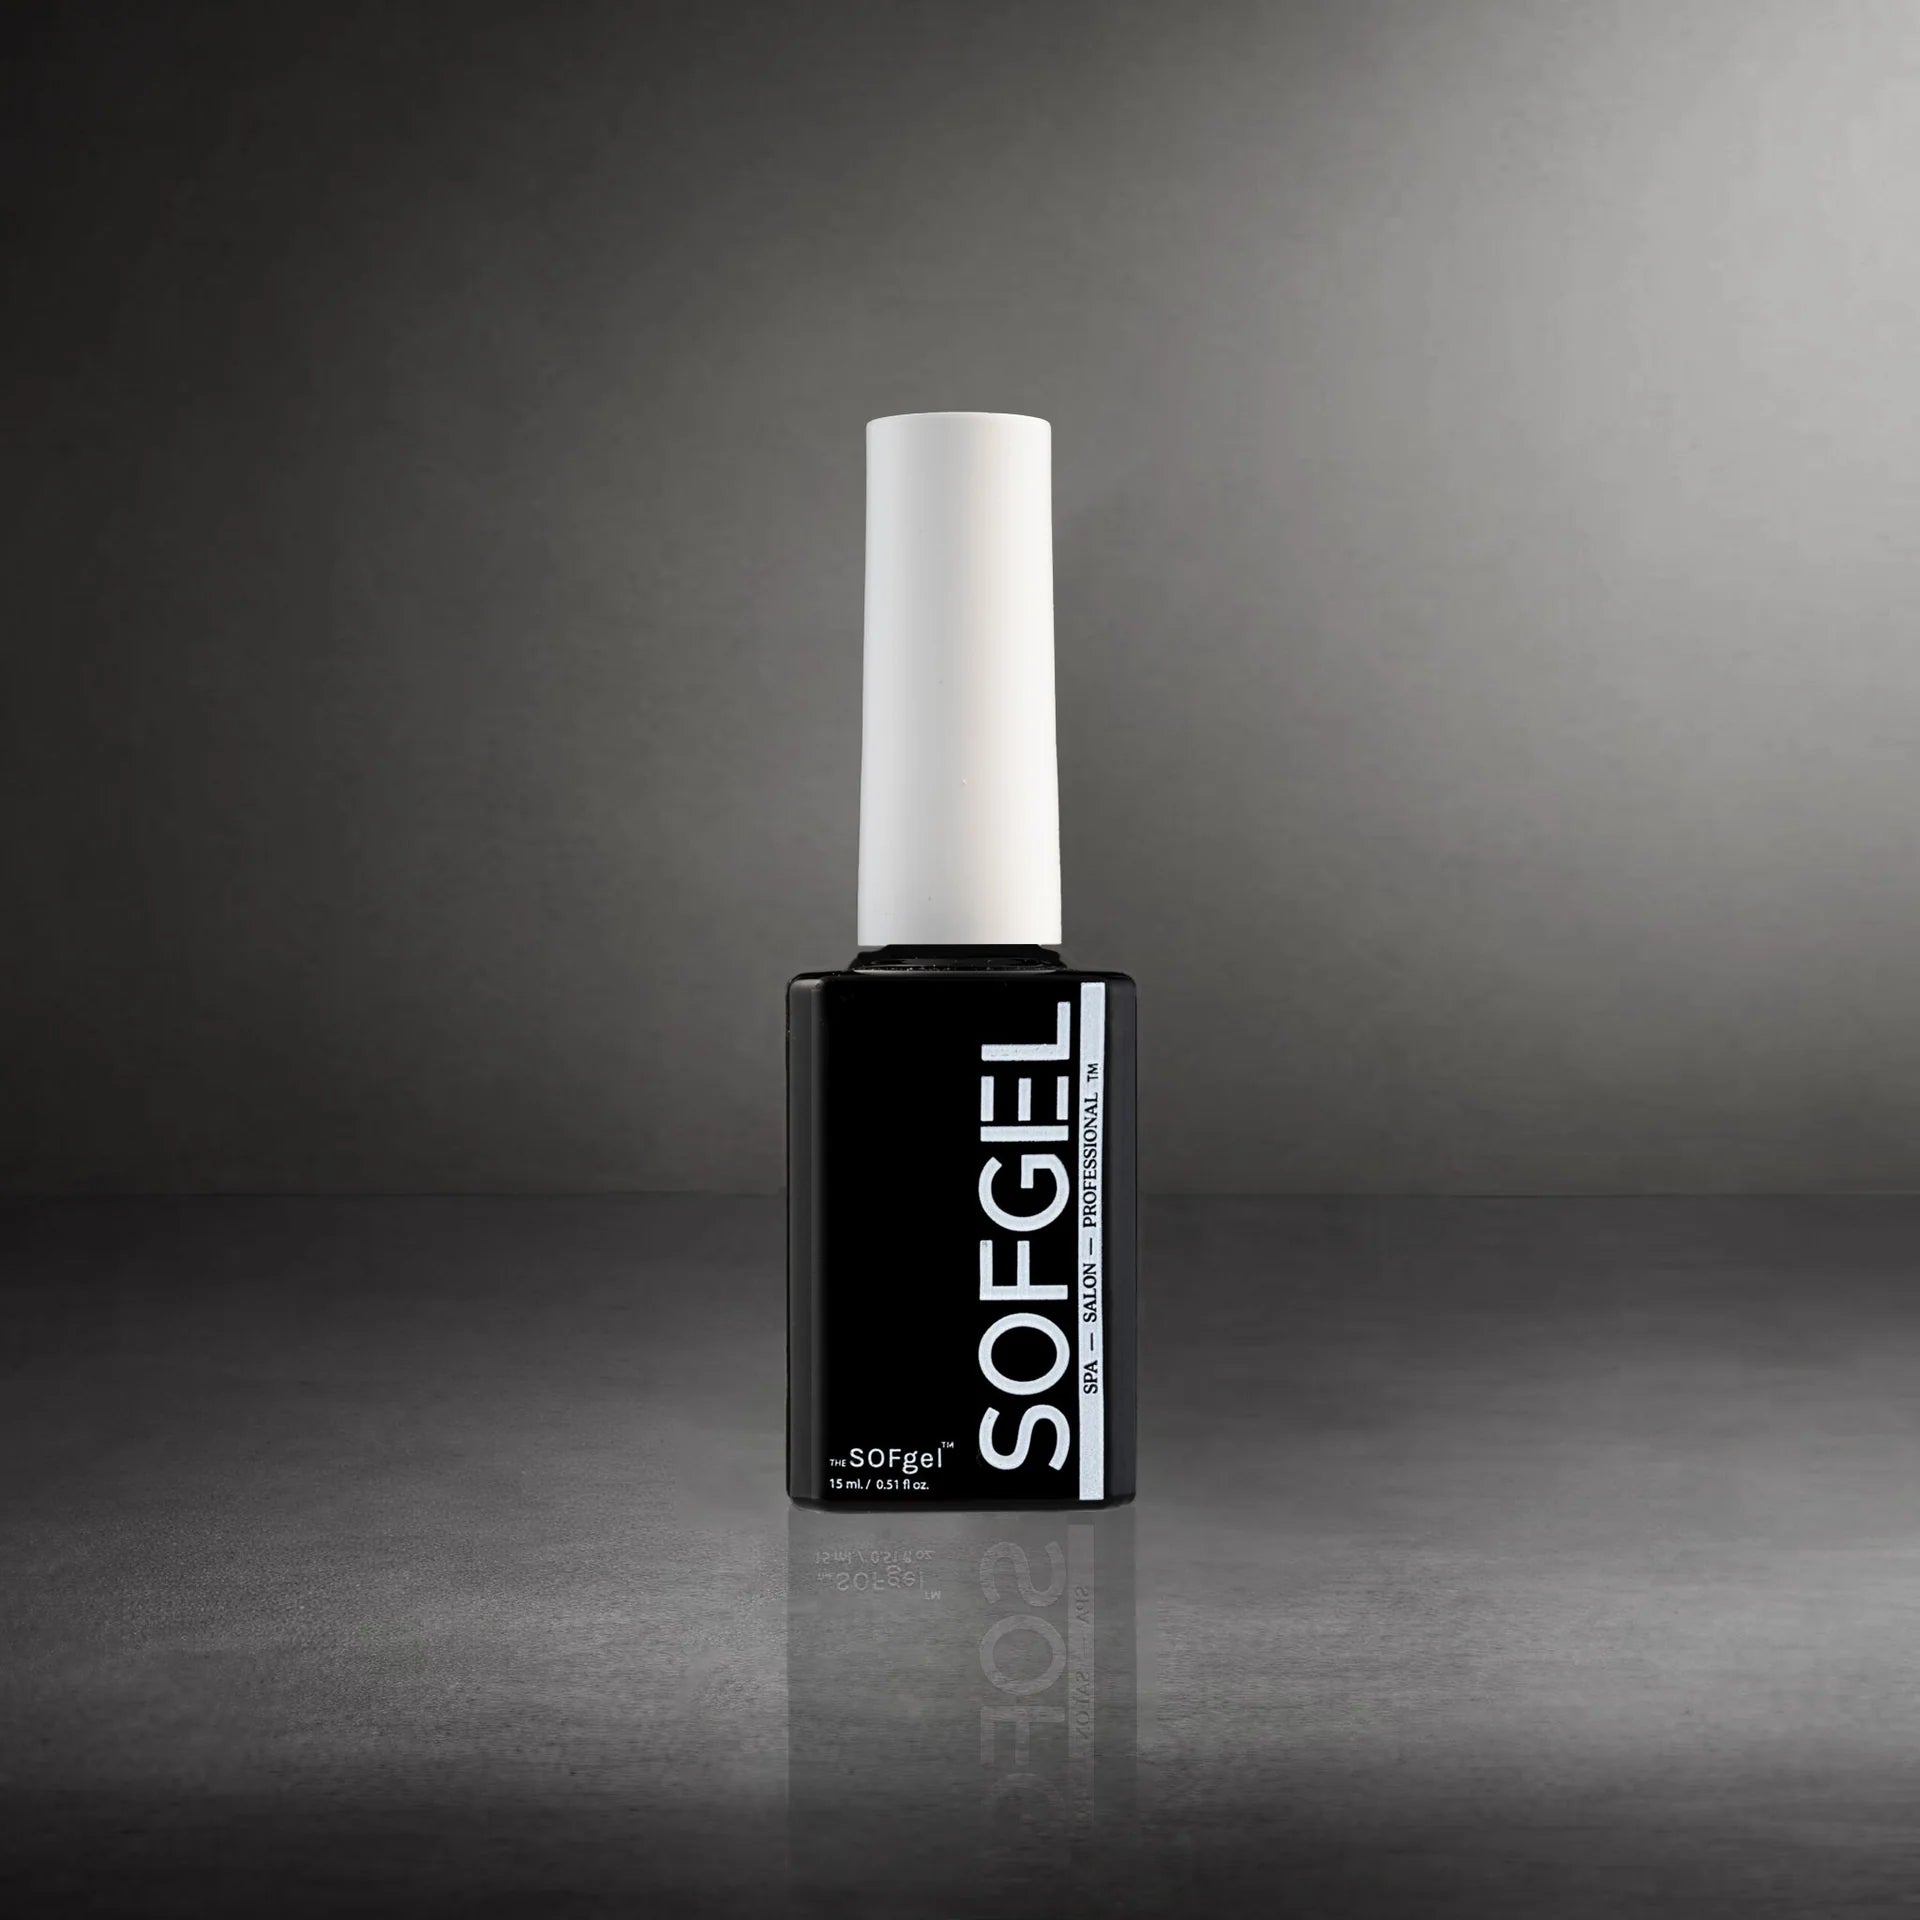 The SOFGEL PRO All-in-one Extend Gel - 15ml